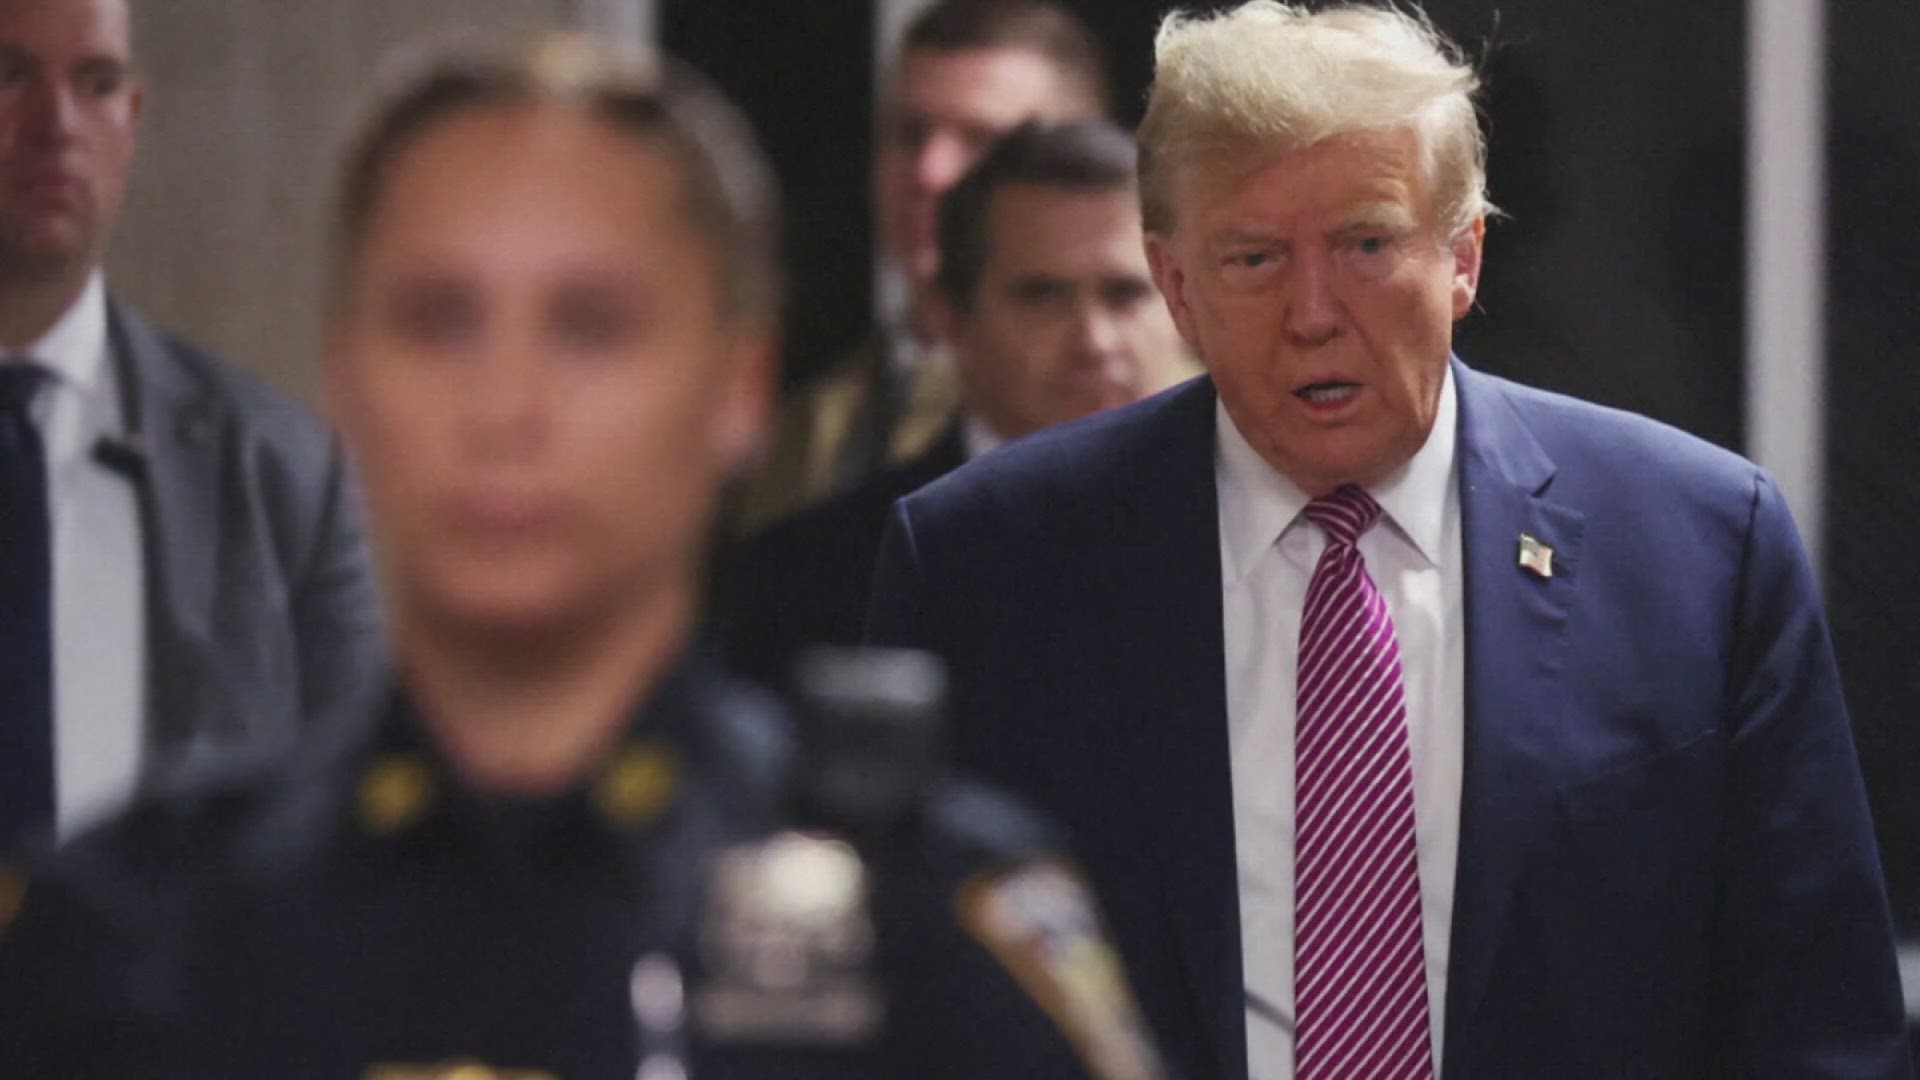 Trump is facing felony charges related to an alleged 2016 hush money payment to adult film actress Stormy Daniels. Here's what we know about the 12 jurors.